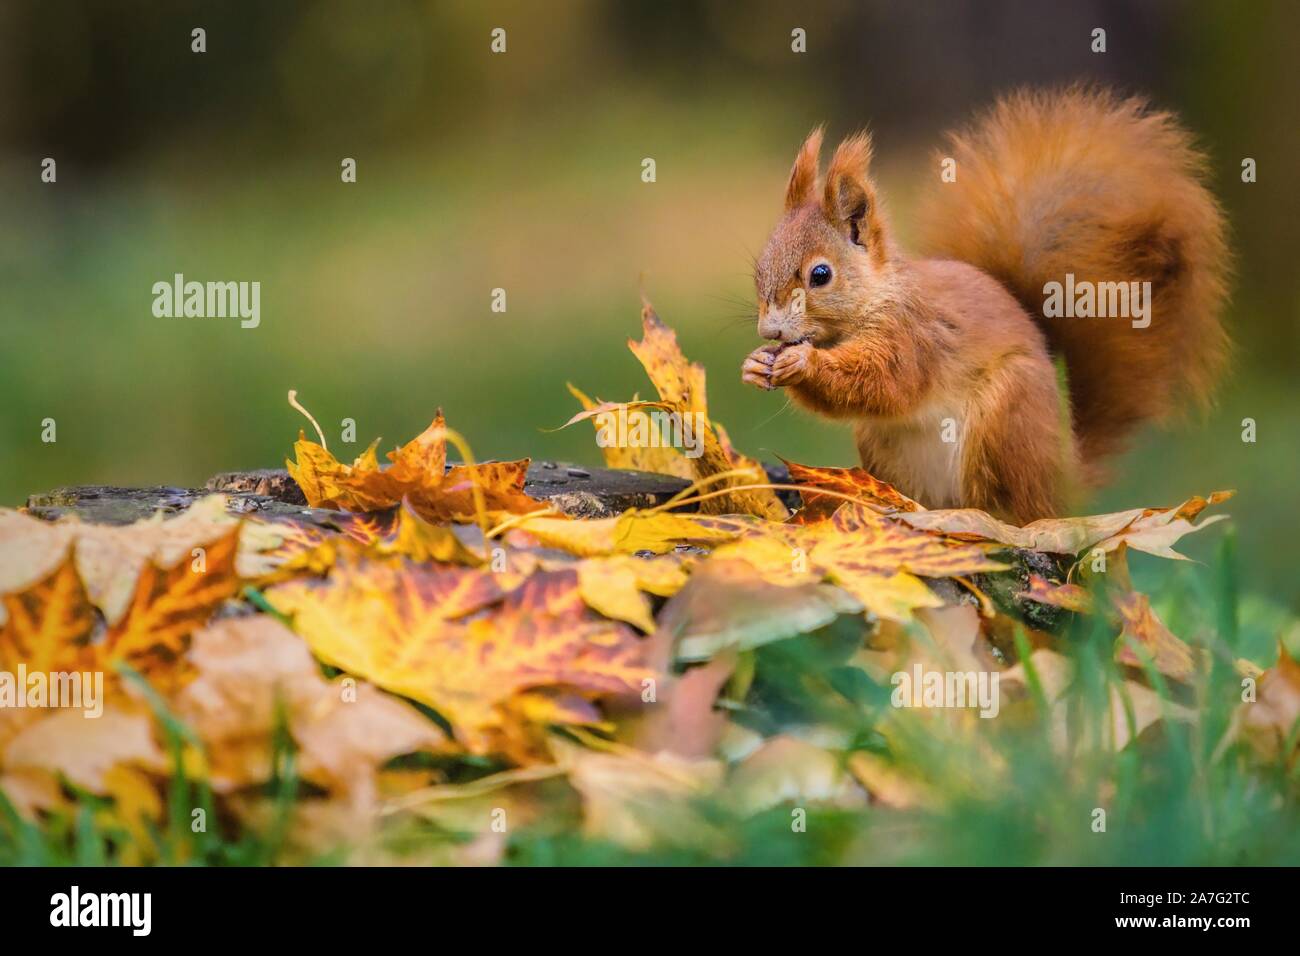 Cute red Eurasian squirrel with fluffy tail sitting on a tree stump covered with colorful leaves feeding on seeds. Sunny autumn day in a deep forest. Stock Photo